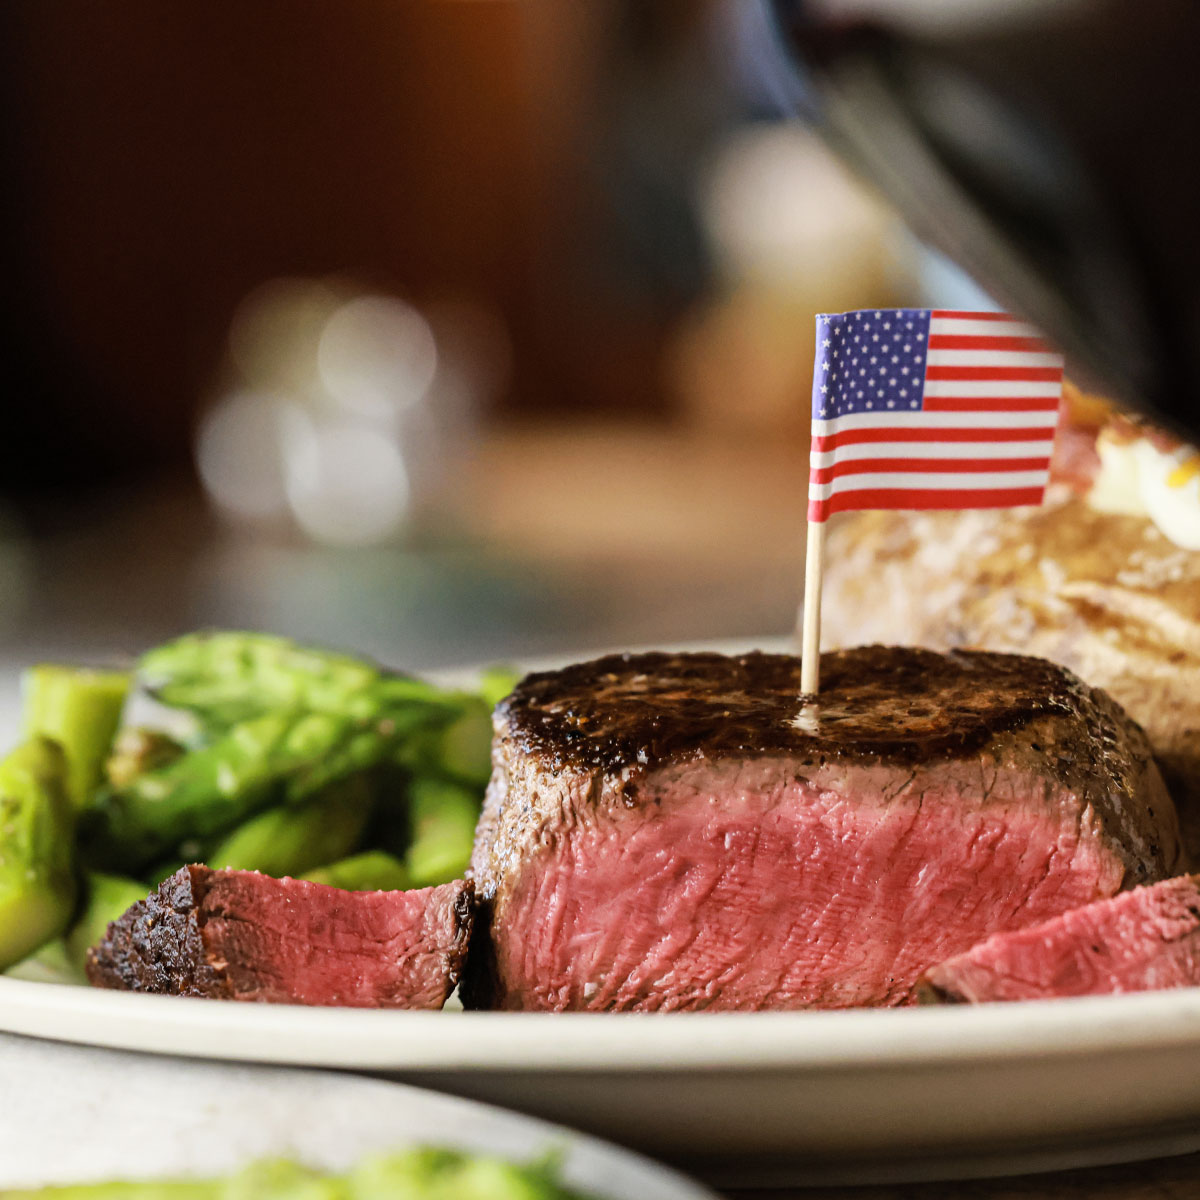 For all the dads that believe in tough love but tender steaks. Make a reservation to celebrate Father’s Day at Ted’s tedsmontanagrill.com/locations.html #OnlyAtTeds